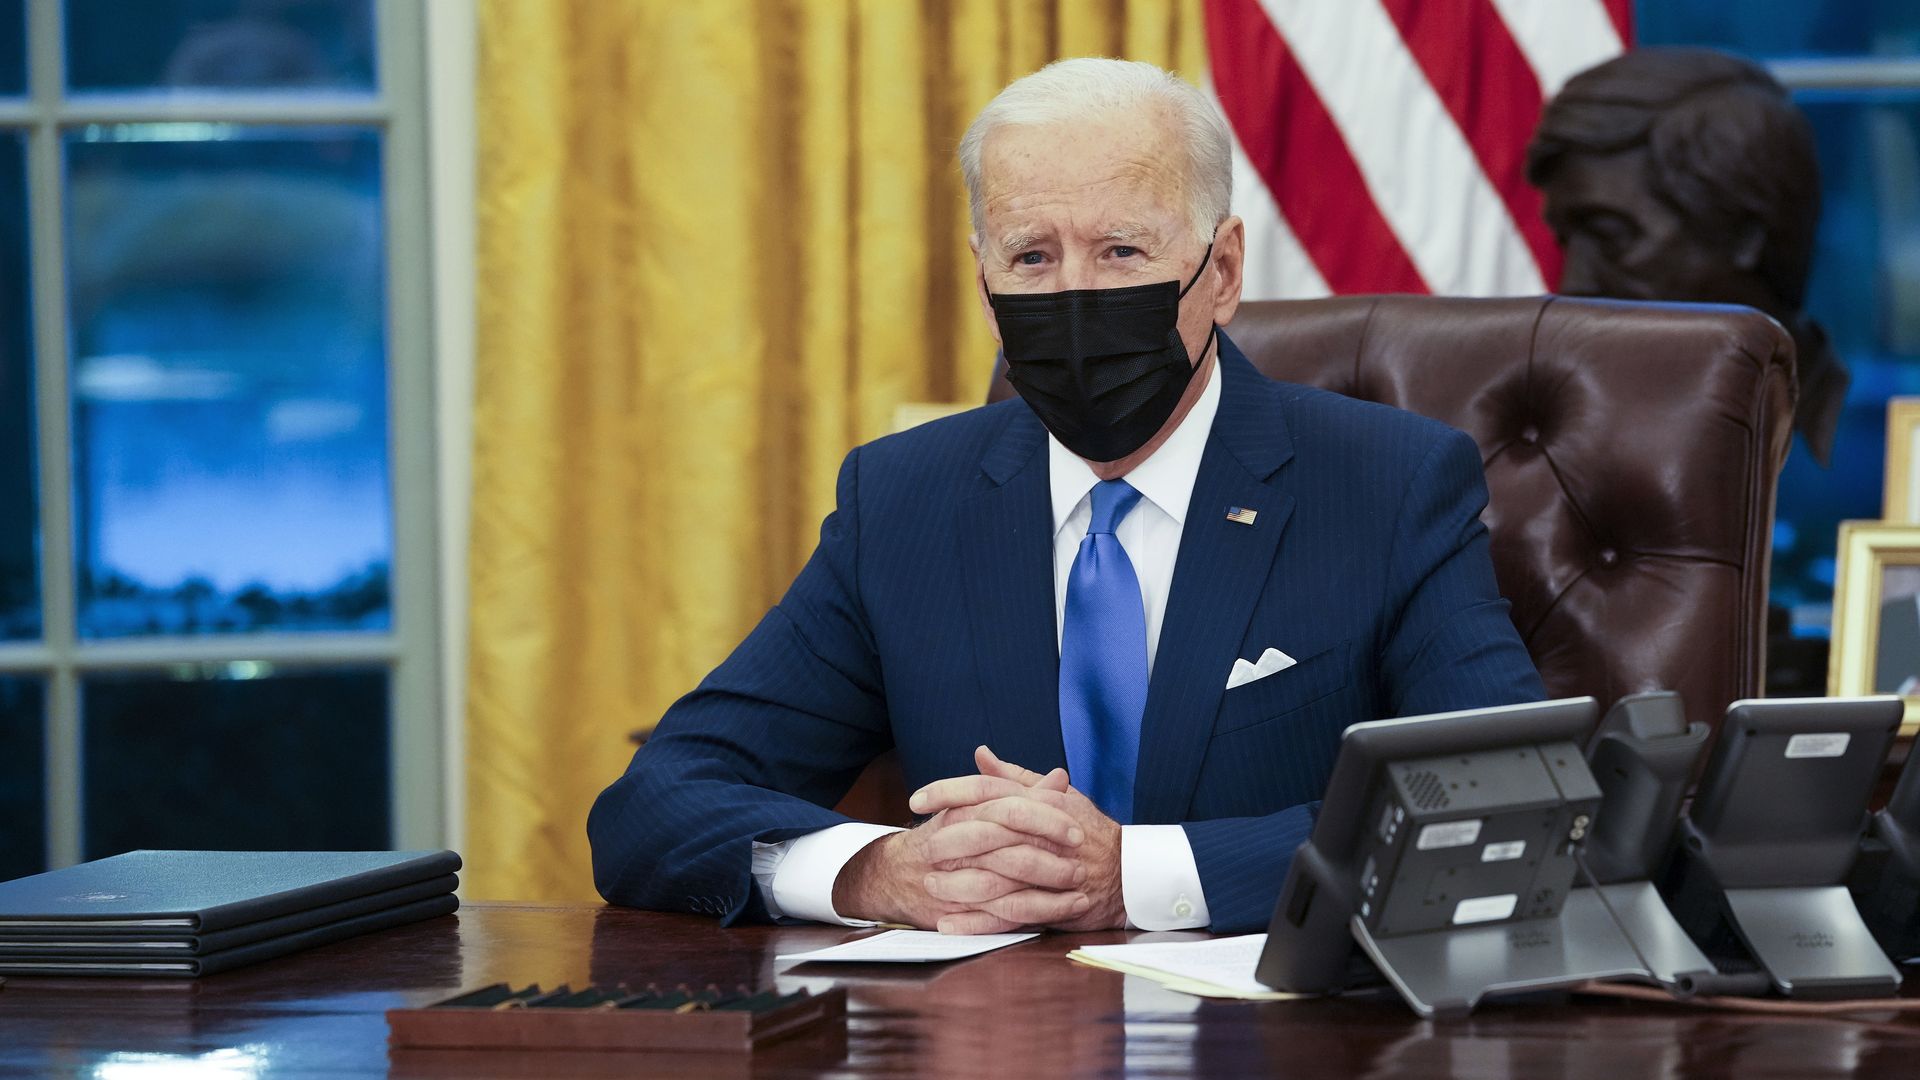 President Joe Biden makes brief remarks before signing several executive orders directing immigration actions for his administration in the Oval Office on February 02, 2021